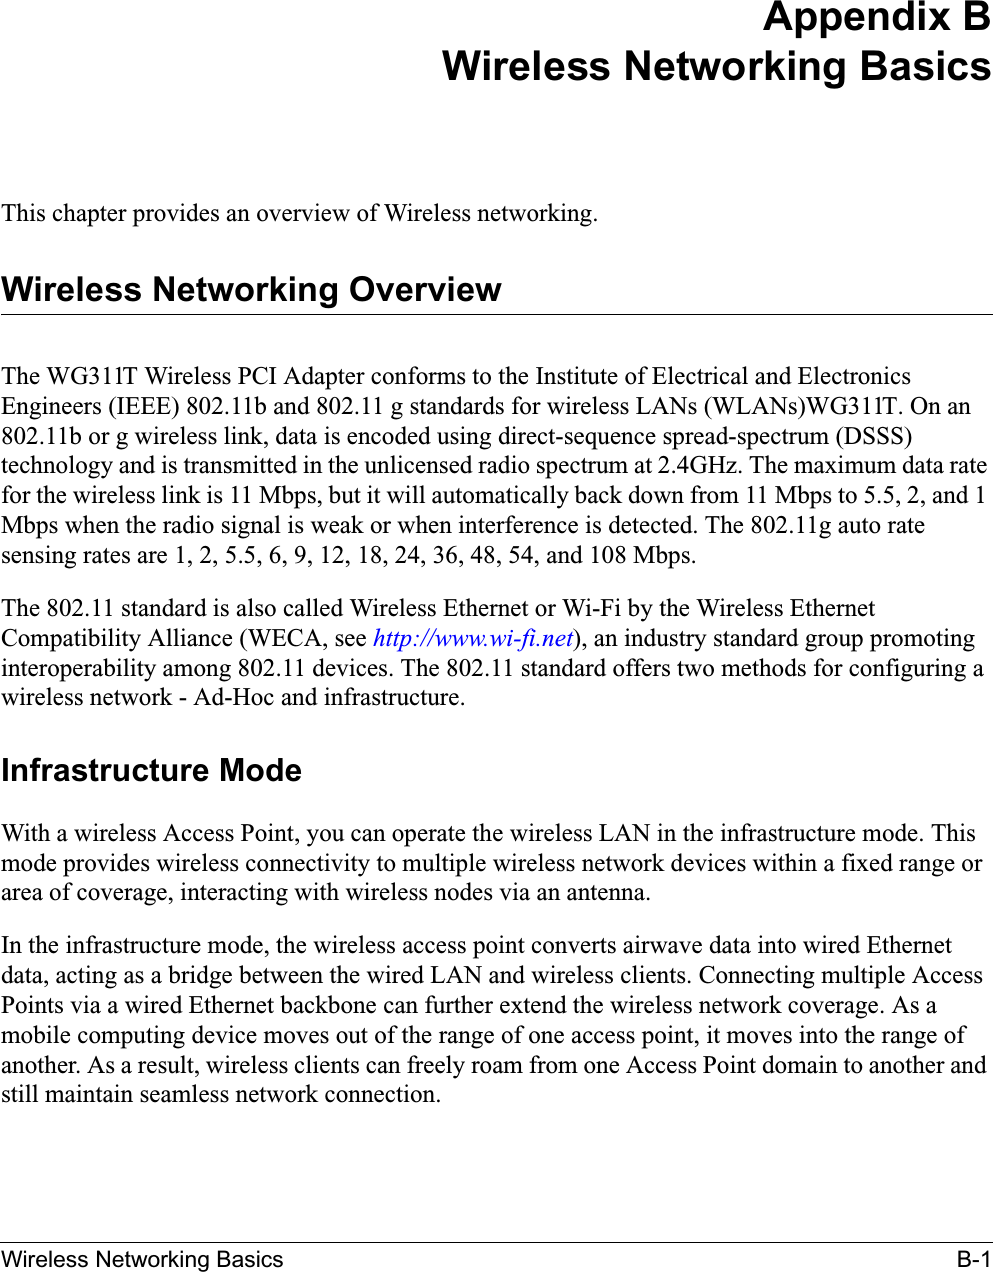 Wireless Networking Basics B-1Appendix BWireless Networking BasicsThis chapter provides an overview of Wireless networking.Wireless Networking OverviewThe WG311T Wireless PCI Adapter conforms to the Institute of Electrical and Electronics Engineers (IEEE) 802.11b and 802.11 g standards for wireless LANs (WLANs)WG311T. On an 802.11b or g wireless link, data is encoded using direct-sequence spread-spectrum (DSSS) technology and is transmitted in the unlicensed radio spectrum at 2.4GHz. The maximum data rate for the wireless link is 11 Mbps, but it will automatically back down from 11 Mbps to 5.5, 2, and 1 Mbps when the radio signal is weak or when interference is detected. The 802.11g auto rate sensing rates are 1, 2, 5.5, 6, 9, 12, 18, 24, 36, 48, 54, and 108 Mbps.The 802.11 standard is also called Wireless Ethernet or Wi-Fi by the Wireless Ethernet Compatibility Alliance (WECA, see http://www.wi-fi.net), an industry standard group promoting interoperability among 802.11 devices. The 802.11 standard offers two methods for configuring a wireless network - Ad-Hoc and infrastructure.Infrastructure ModeWith a wireless Access Point, you can operate the wireless LAN in the infrastructure mode. This mode provides wireless connectivity to multiple wireless network devices within a fixed range or area of coverage, interacting with wireless nodes via an antenna. In the infrastructure mode, the wireless access point converts airwave data into wired Ethernet data, acting as a bridge between the wired LAN and wireless clients. Connecting multiple Access Points via a wired Ethernet backbone can further extend the wireless network coverage. As a mobile computing device moves out of the range of one access point, it moves into the range of another. As a result, wireless clients can freely roam from one Access Point domain to another and still maintain seamless network connection.